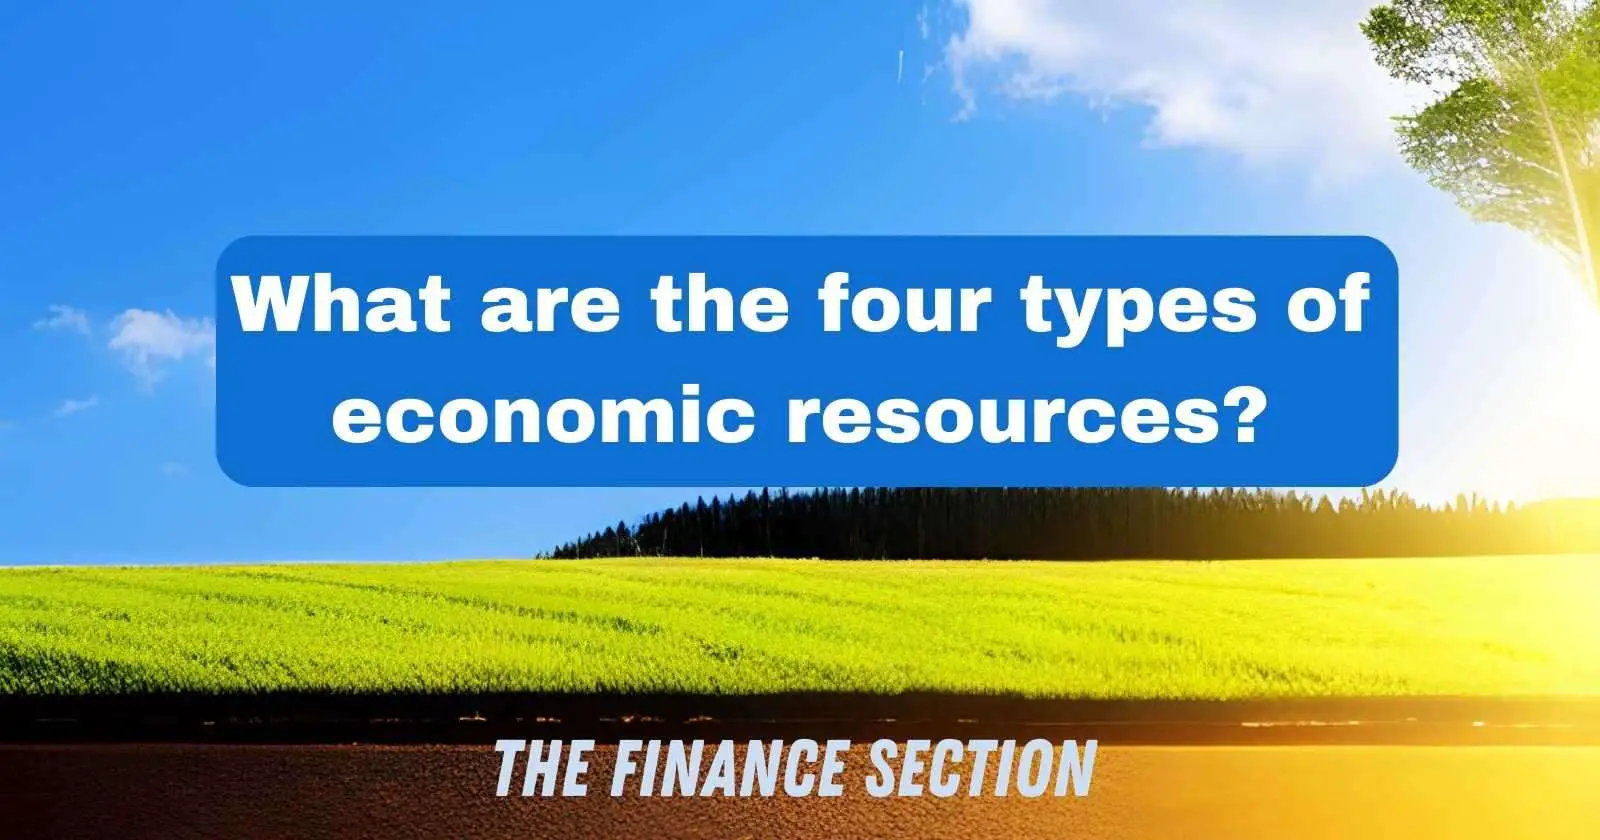 What are the four types of economic resources?